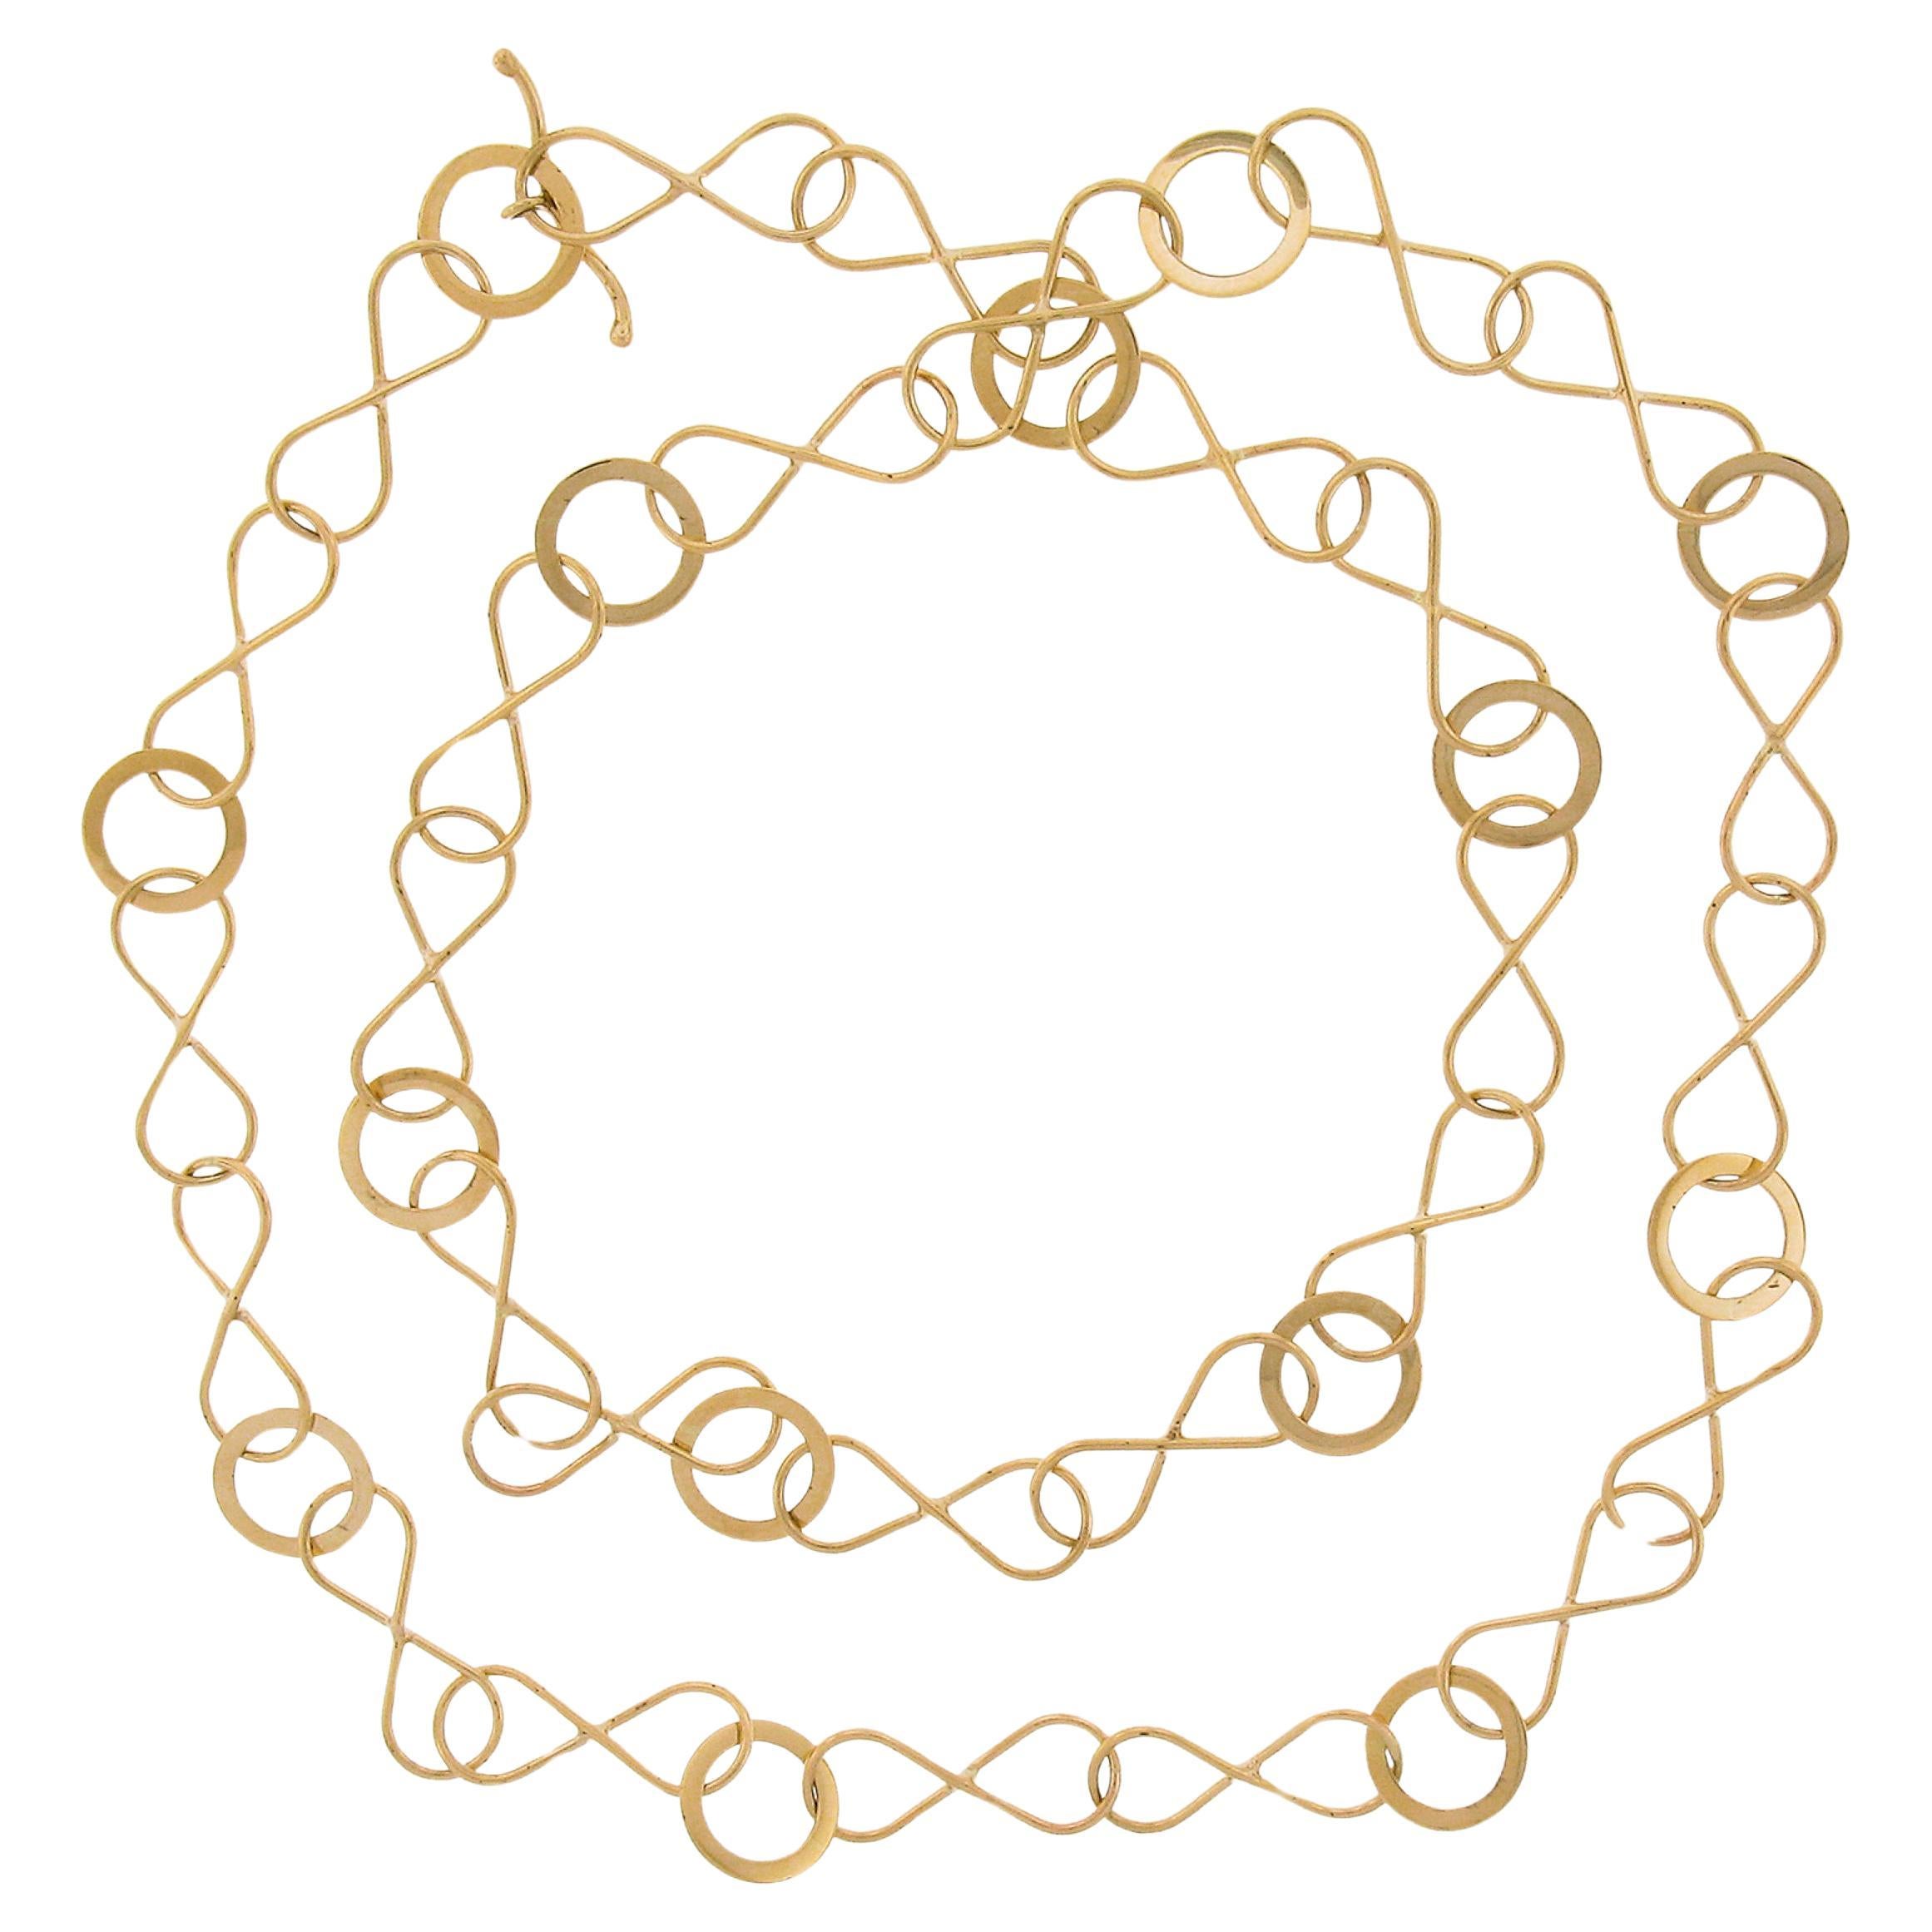 14k Gold 24.5" Polished Infinity & Round Link Chain Necklace w/ Toggle Clasp For Sale